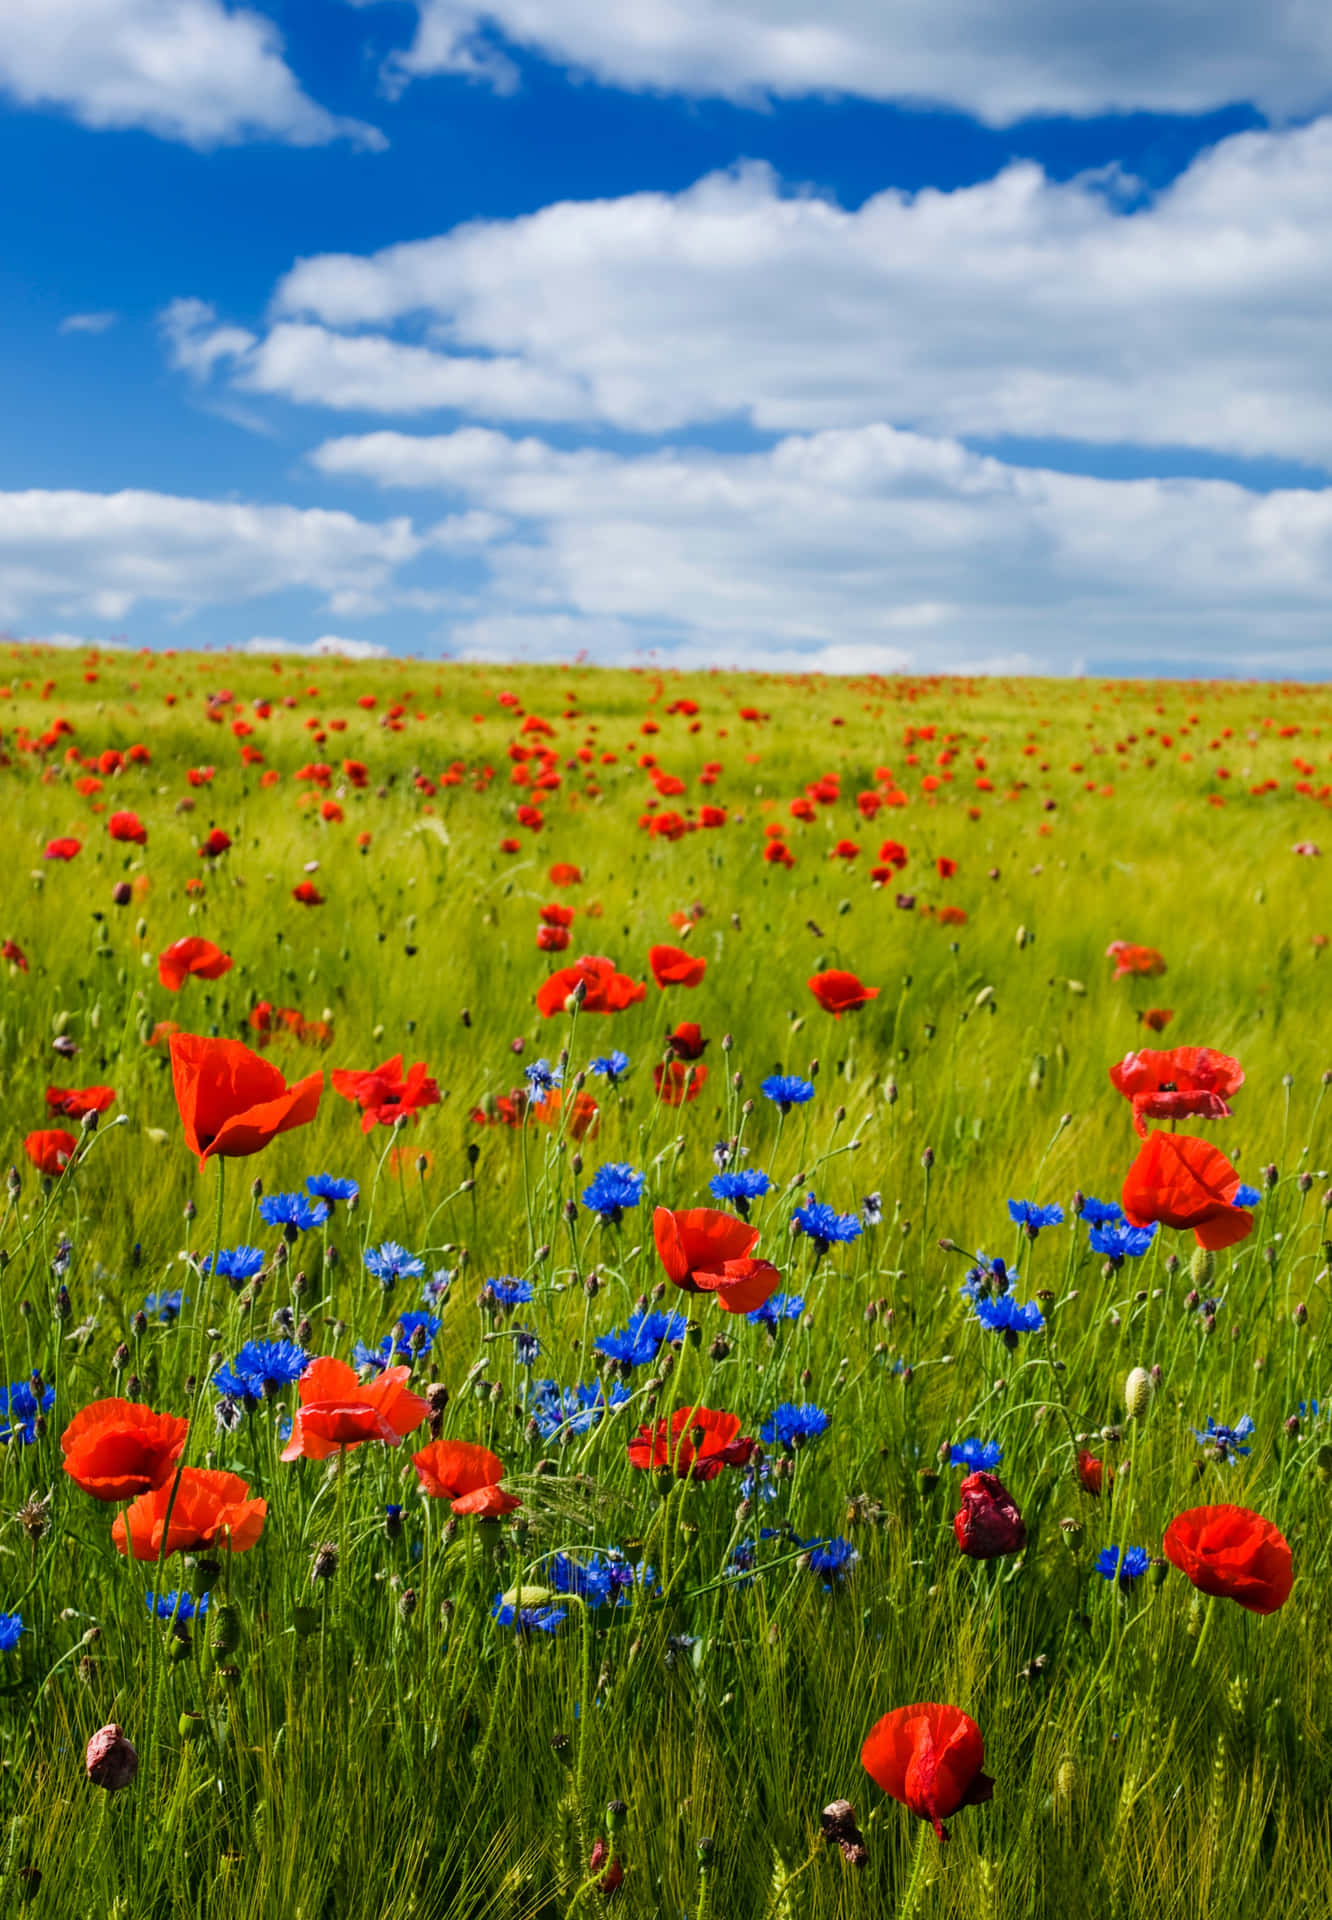 Nature is beautiful - the endless sea of wildflowers in the Flower Field.